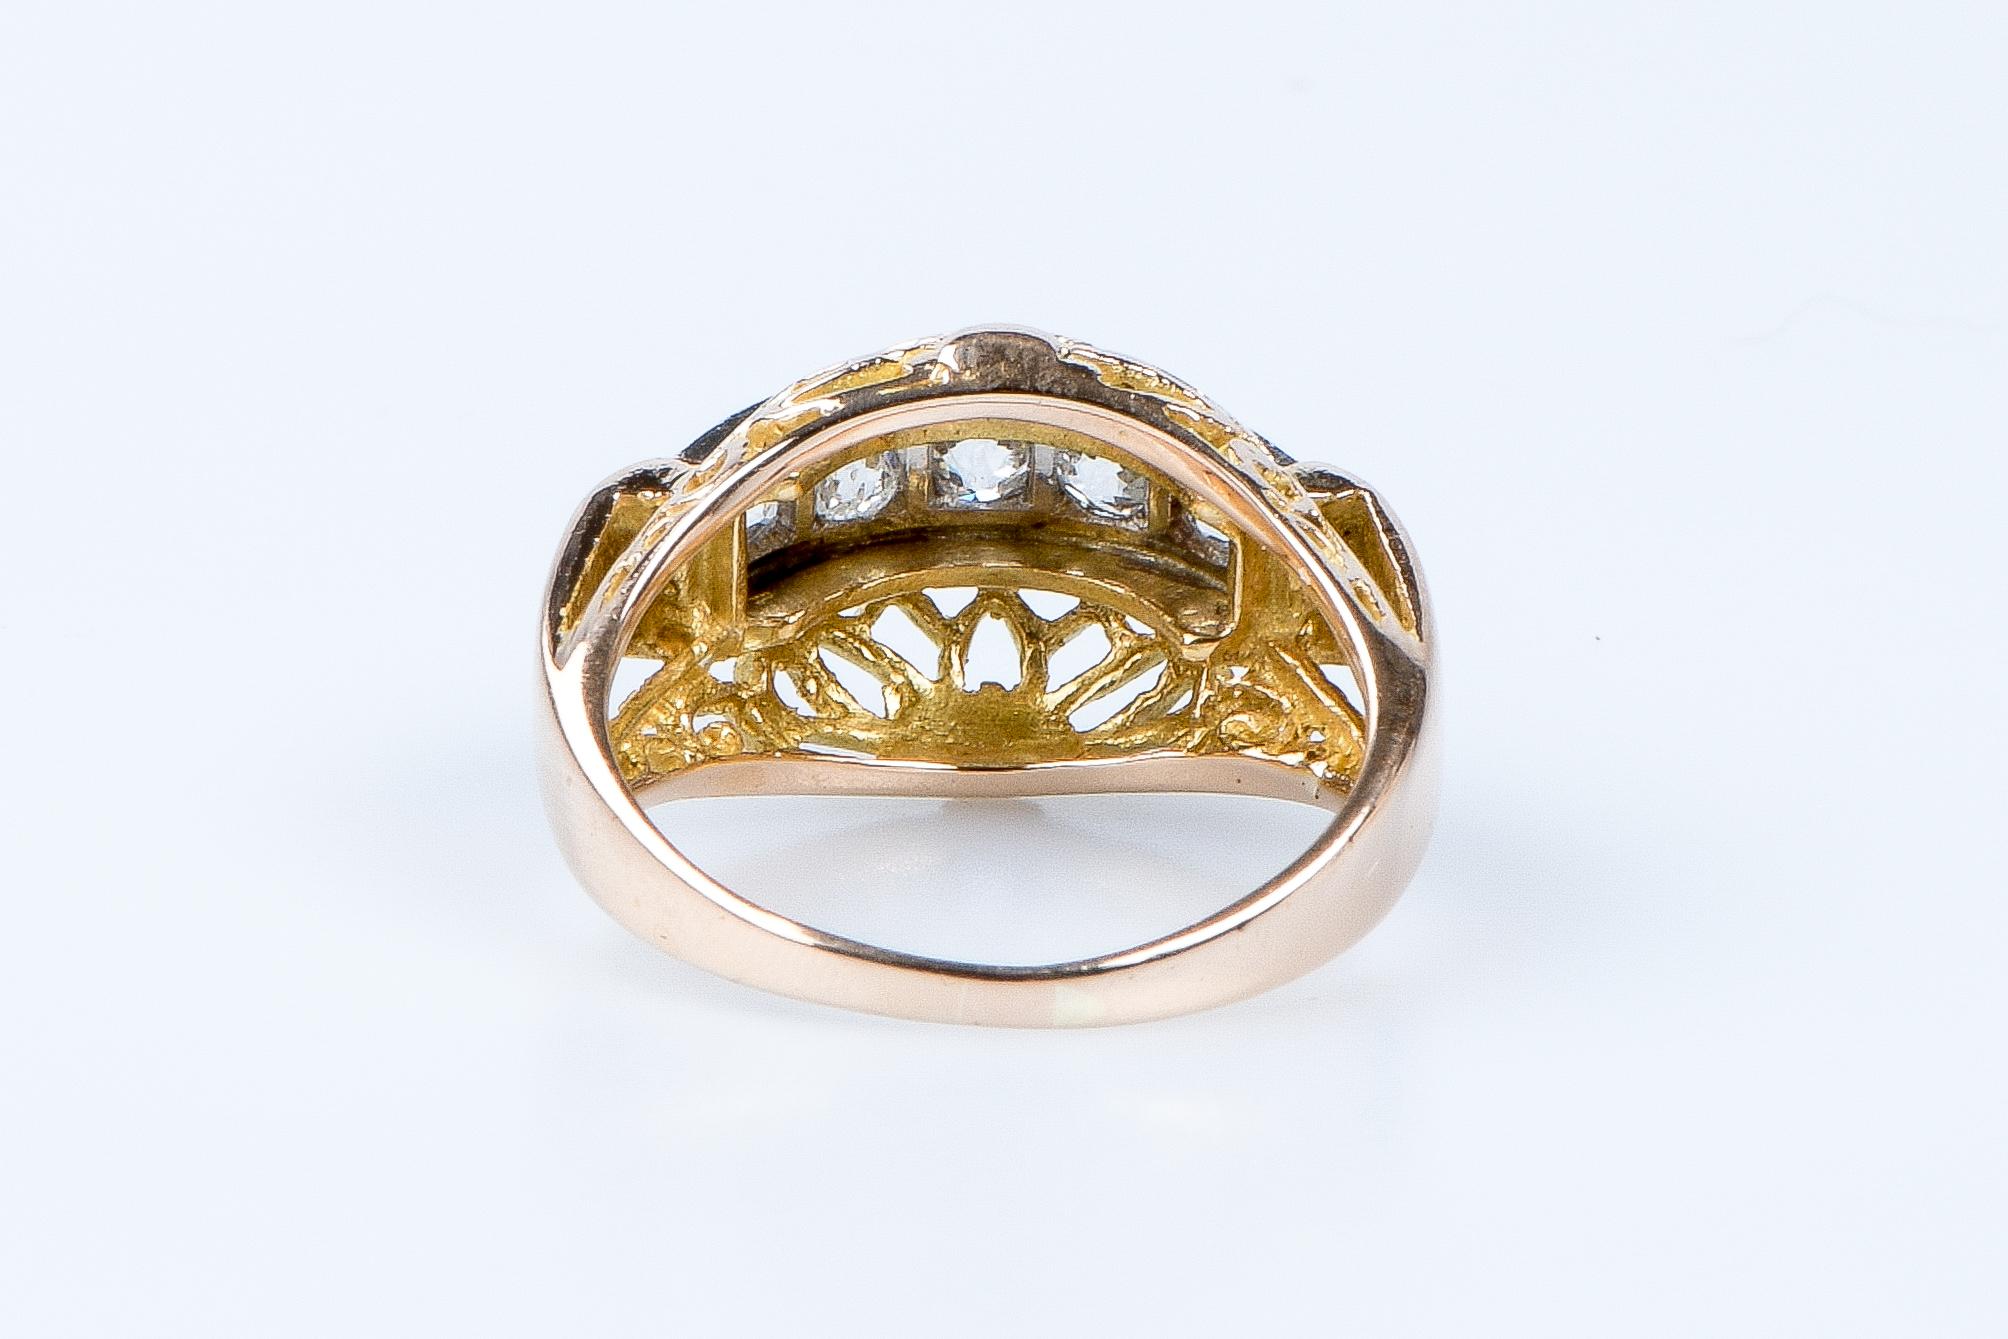 For Sale:  18 carat yellow and white gold ring designed with 5 round brillant cut diamonds 9